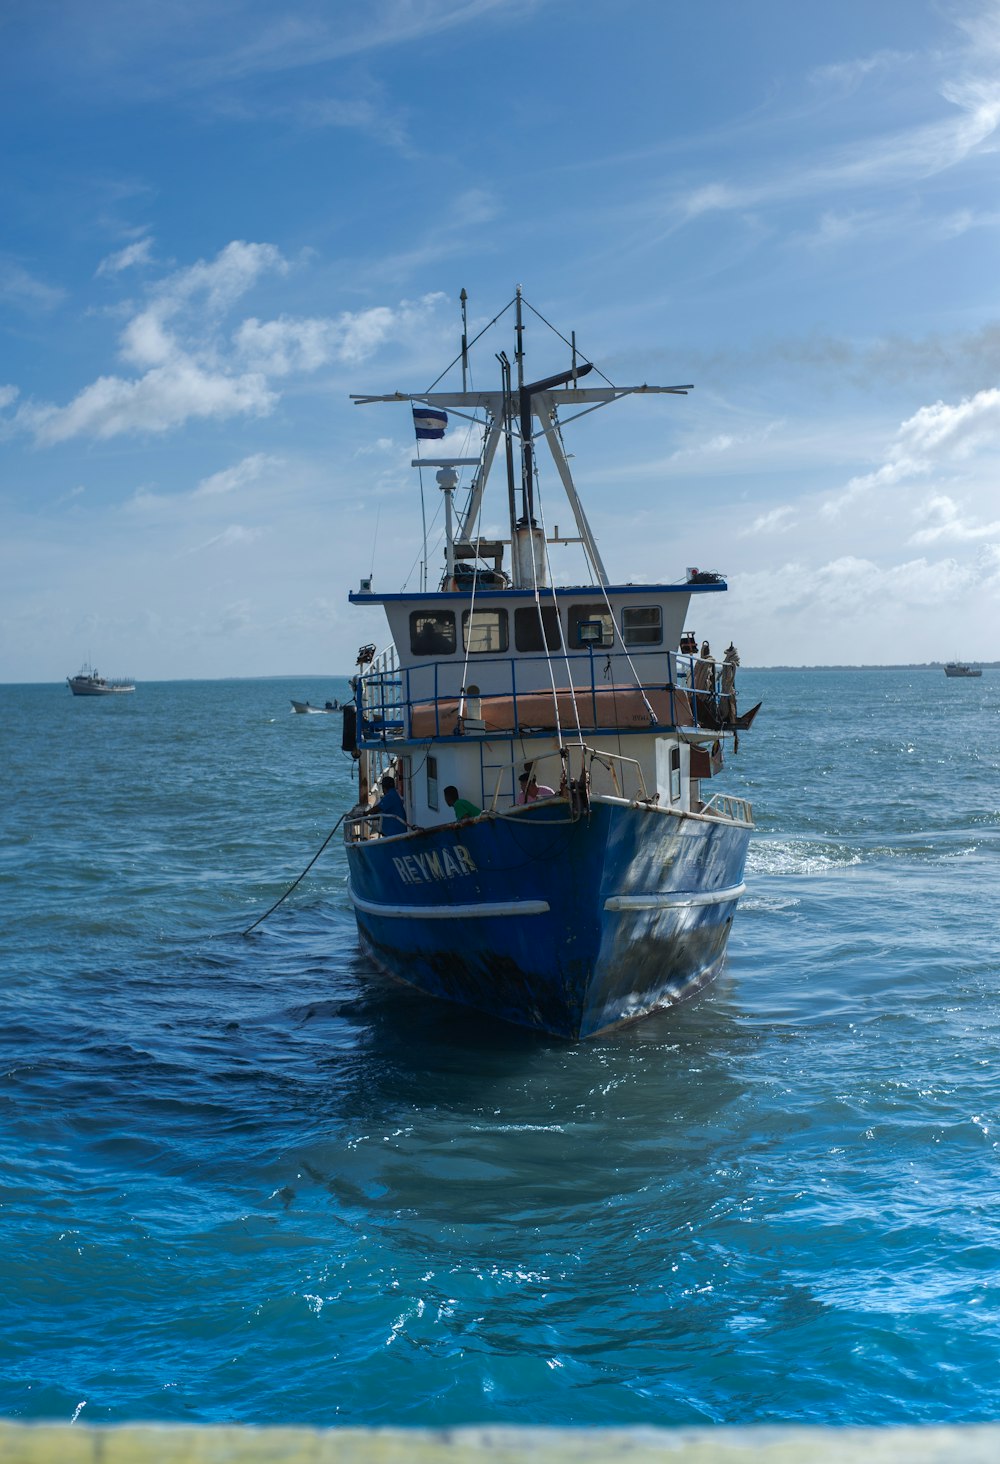 brown and black boat on sea under blue sky during daytime